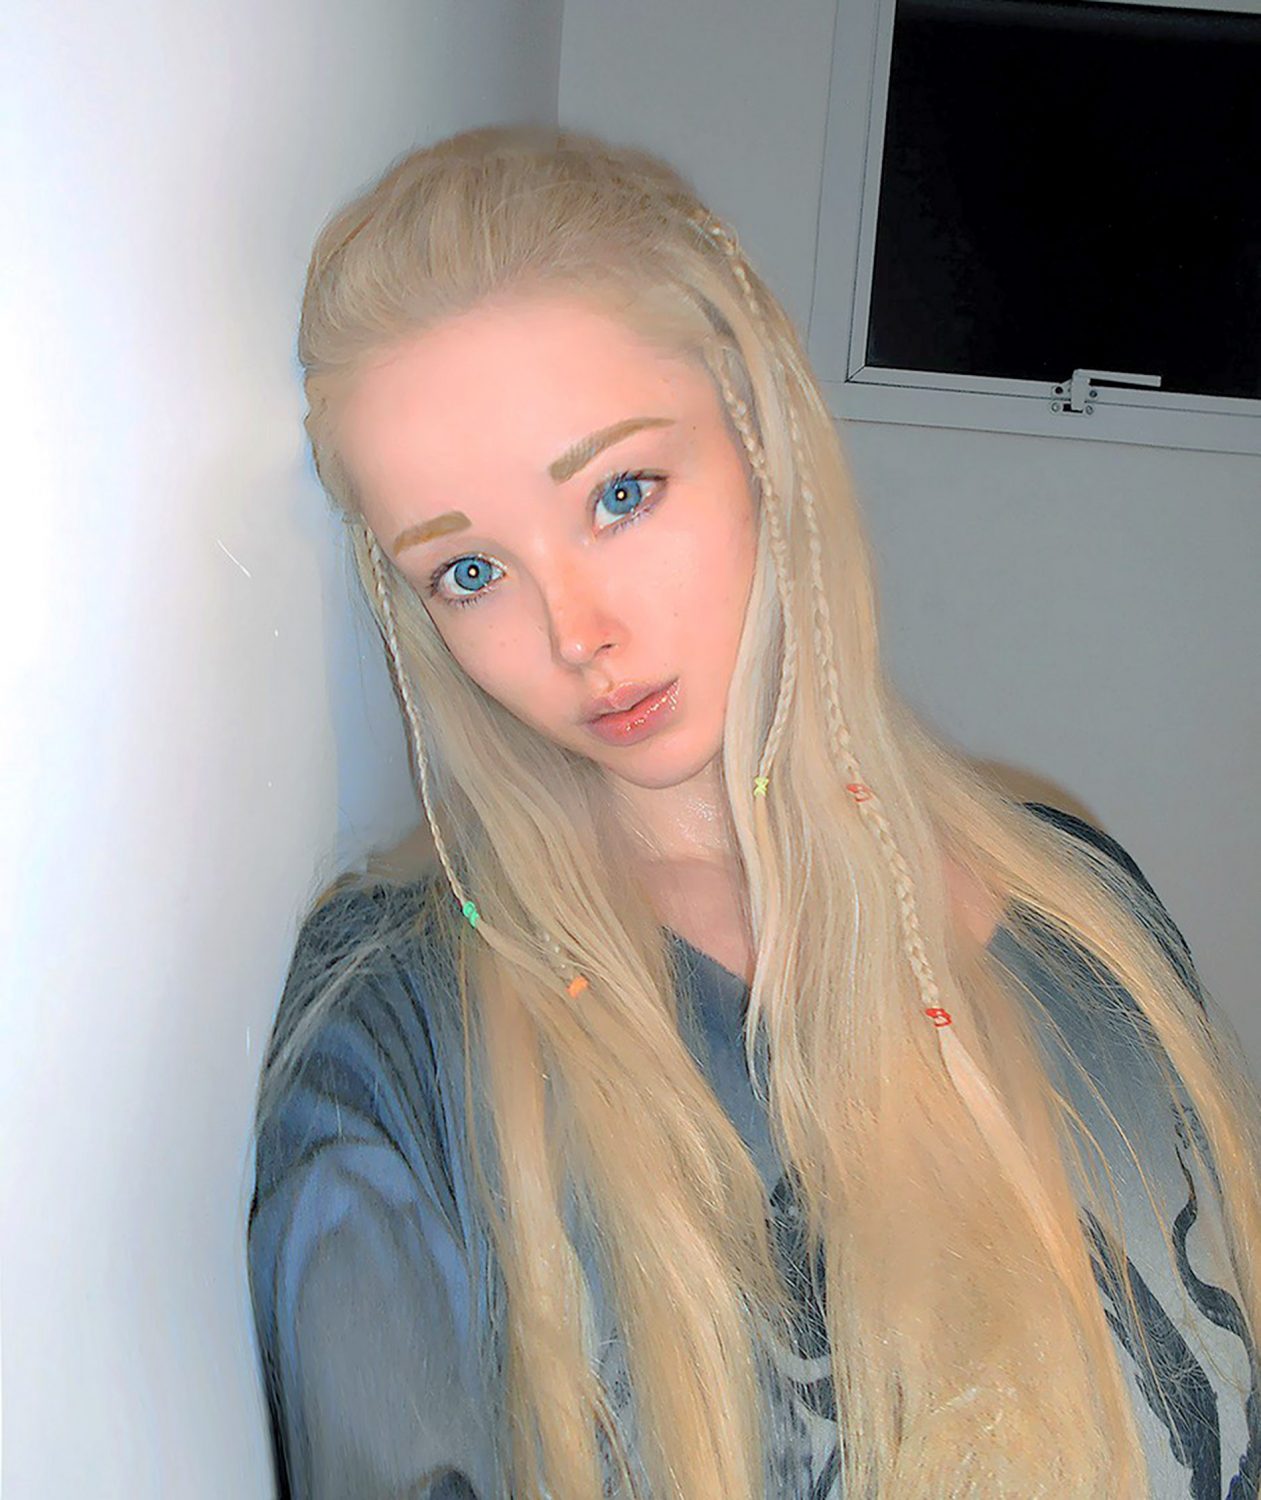 the woman who tries to look exactly like a barbie doll posted pics without makeup